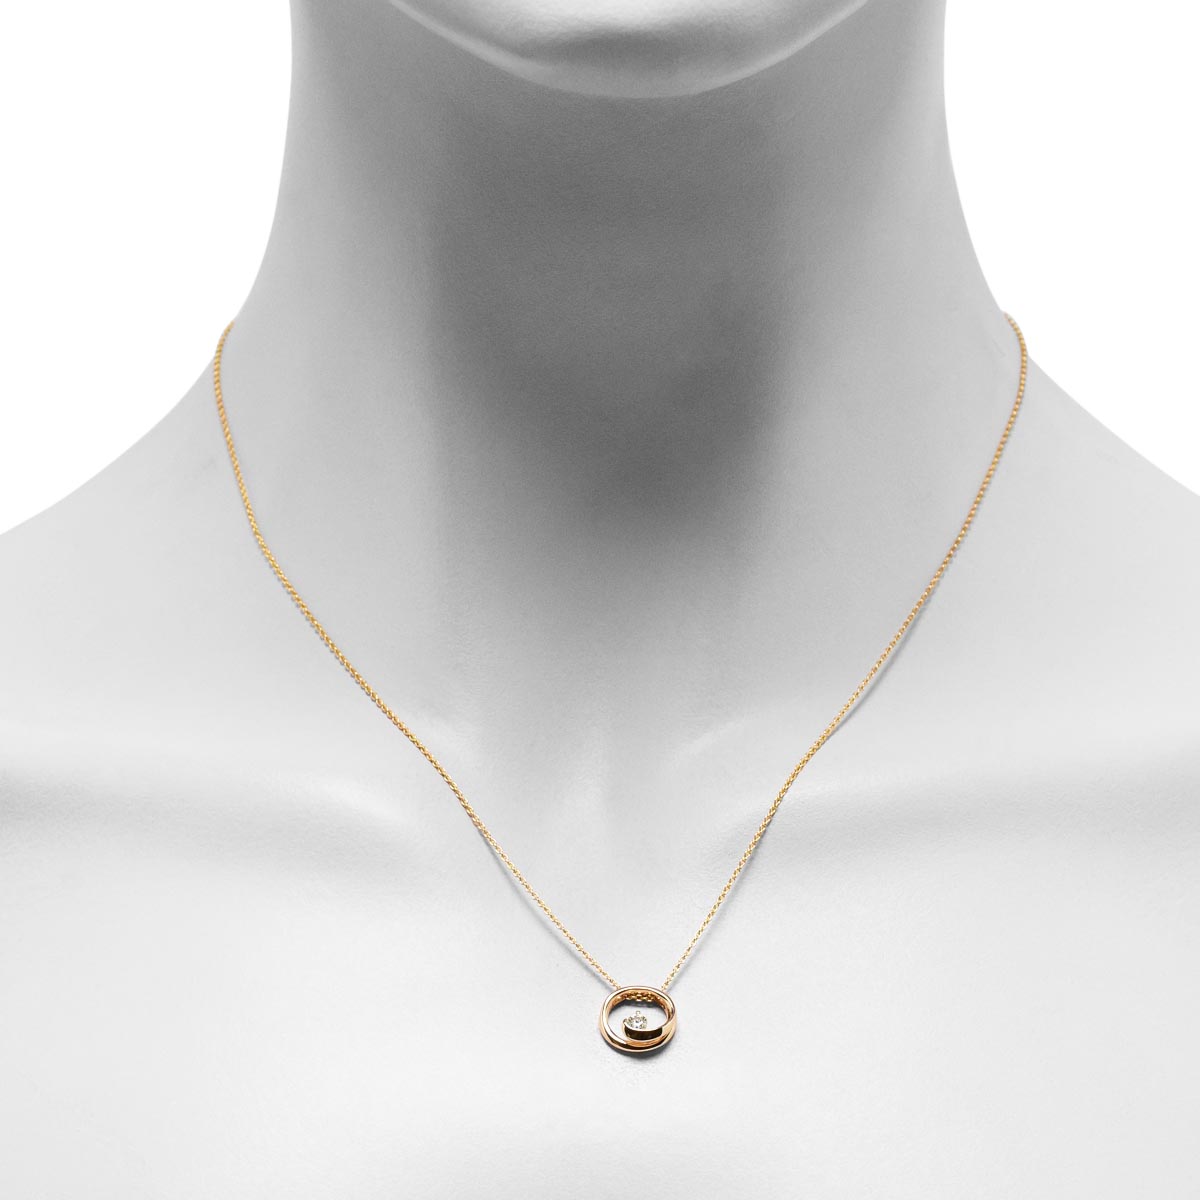 Northern Star Diamond Celestial Collection Necklace in 10kt Yellow Gold (1/10ct)